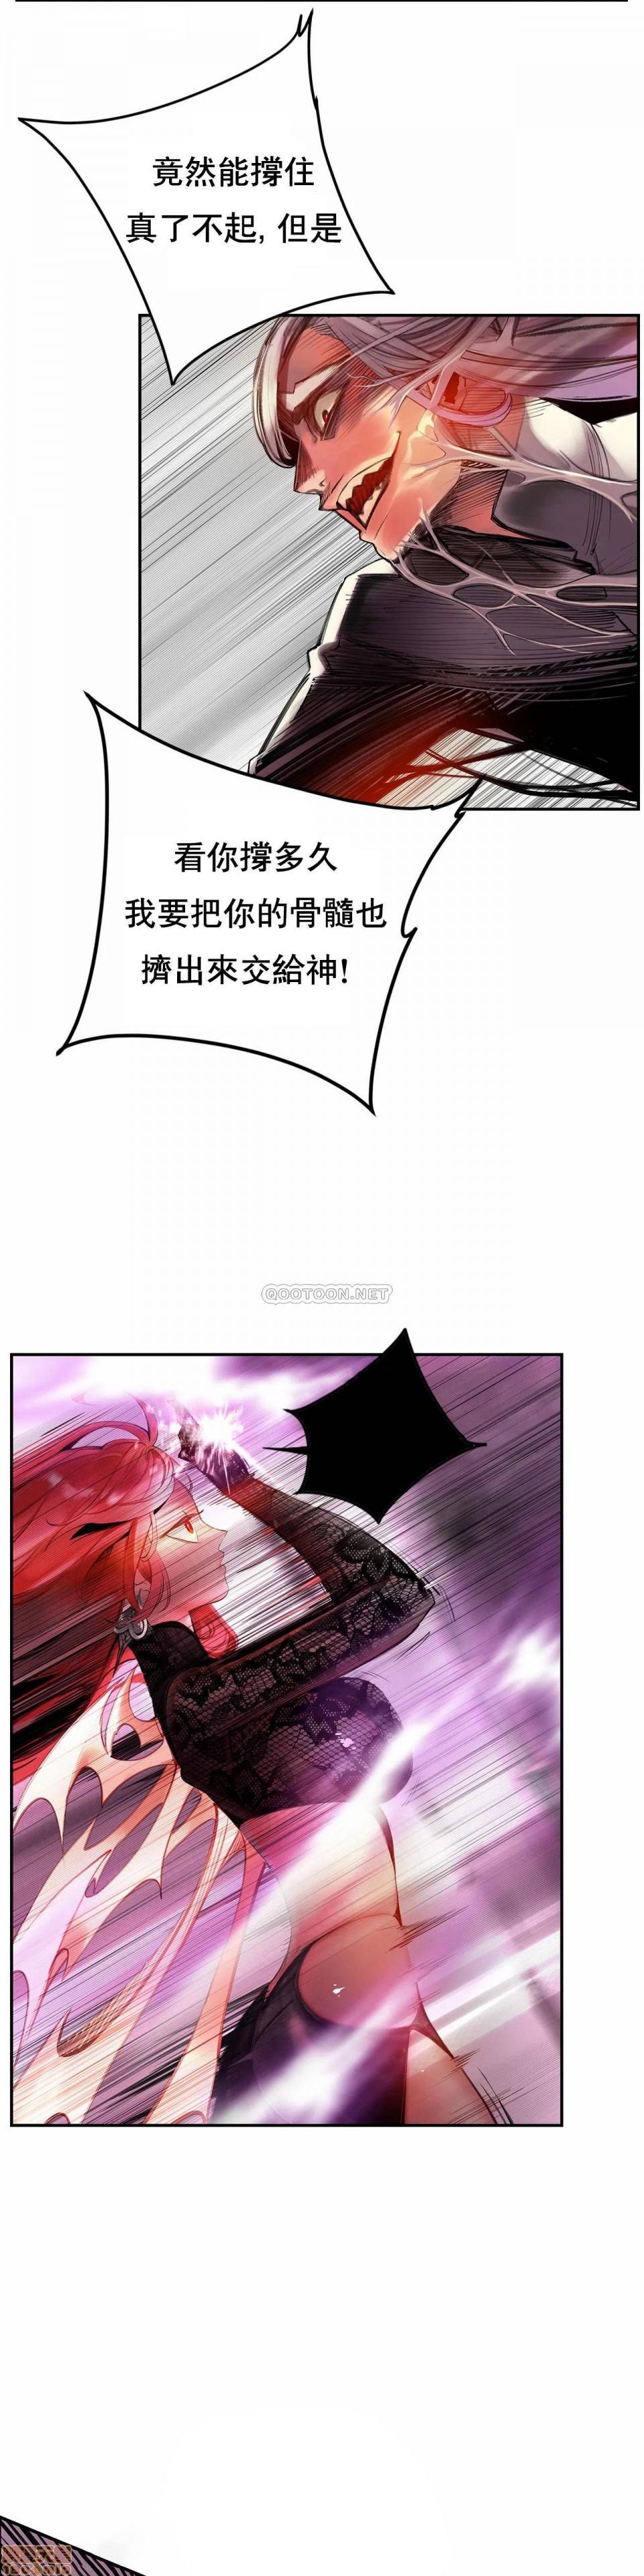 [Juder] Lilith`s Cord (第二季) Ch.77-93 end [Chinese] 128